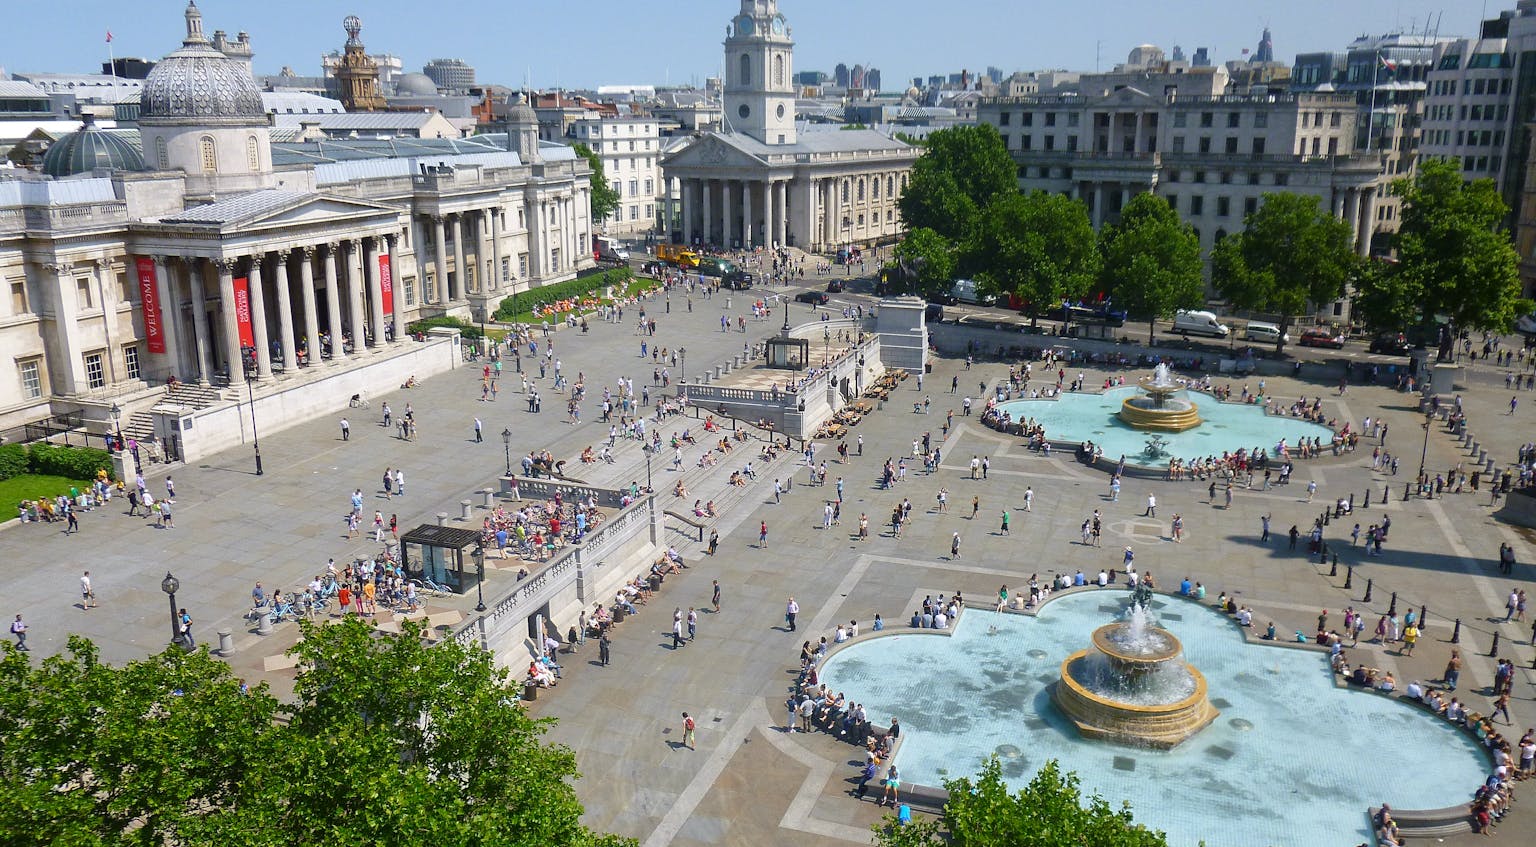 The National Gallery and Trafalgar Square